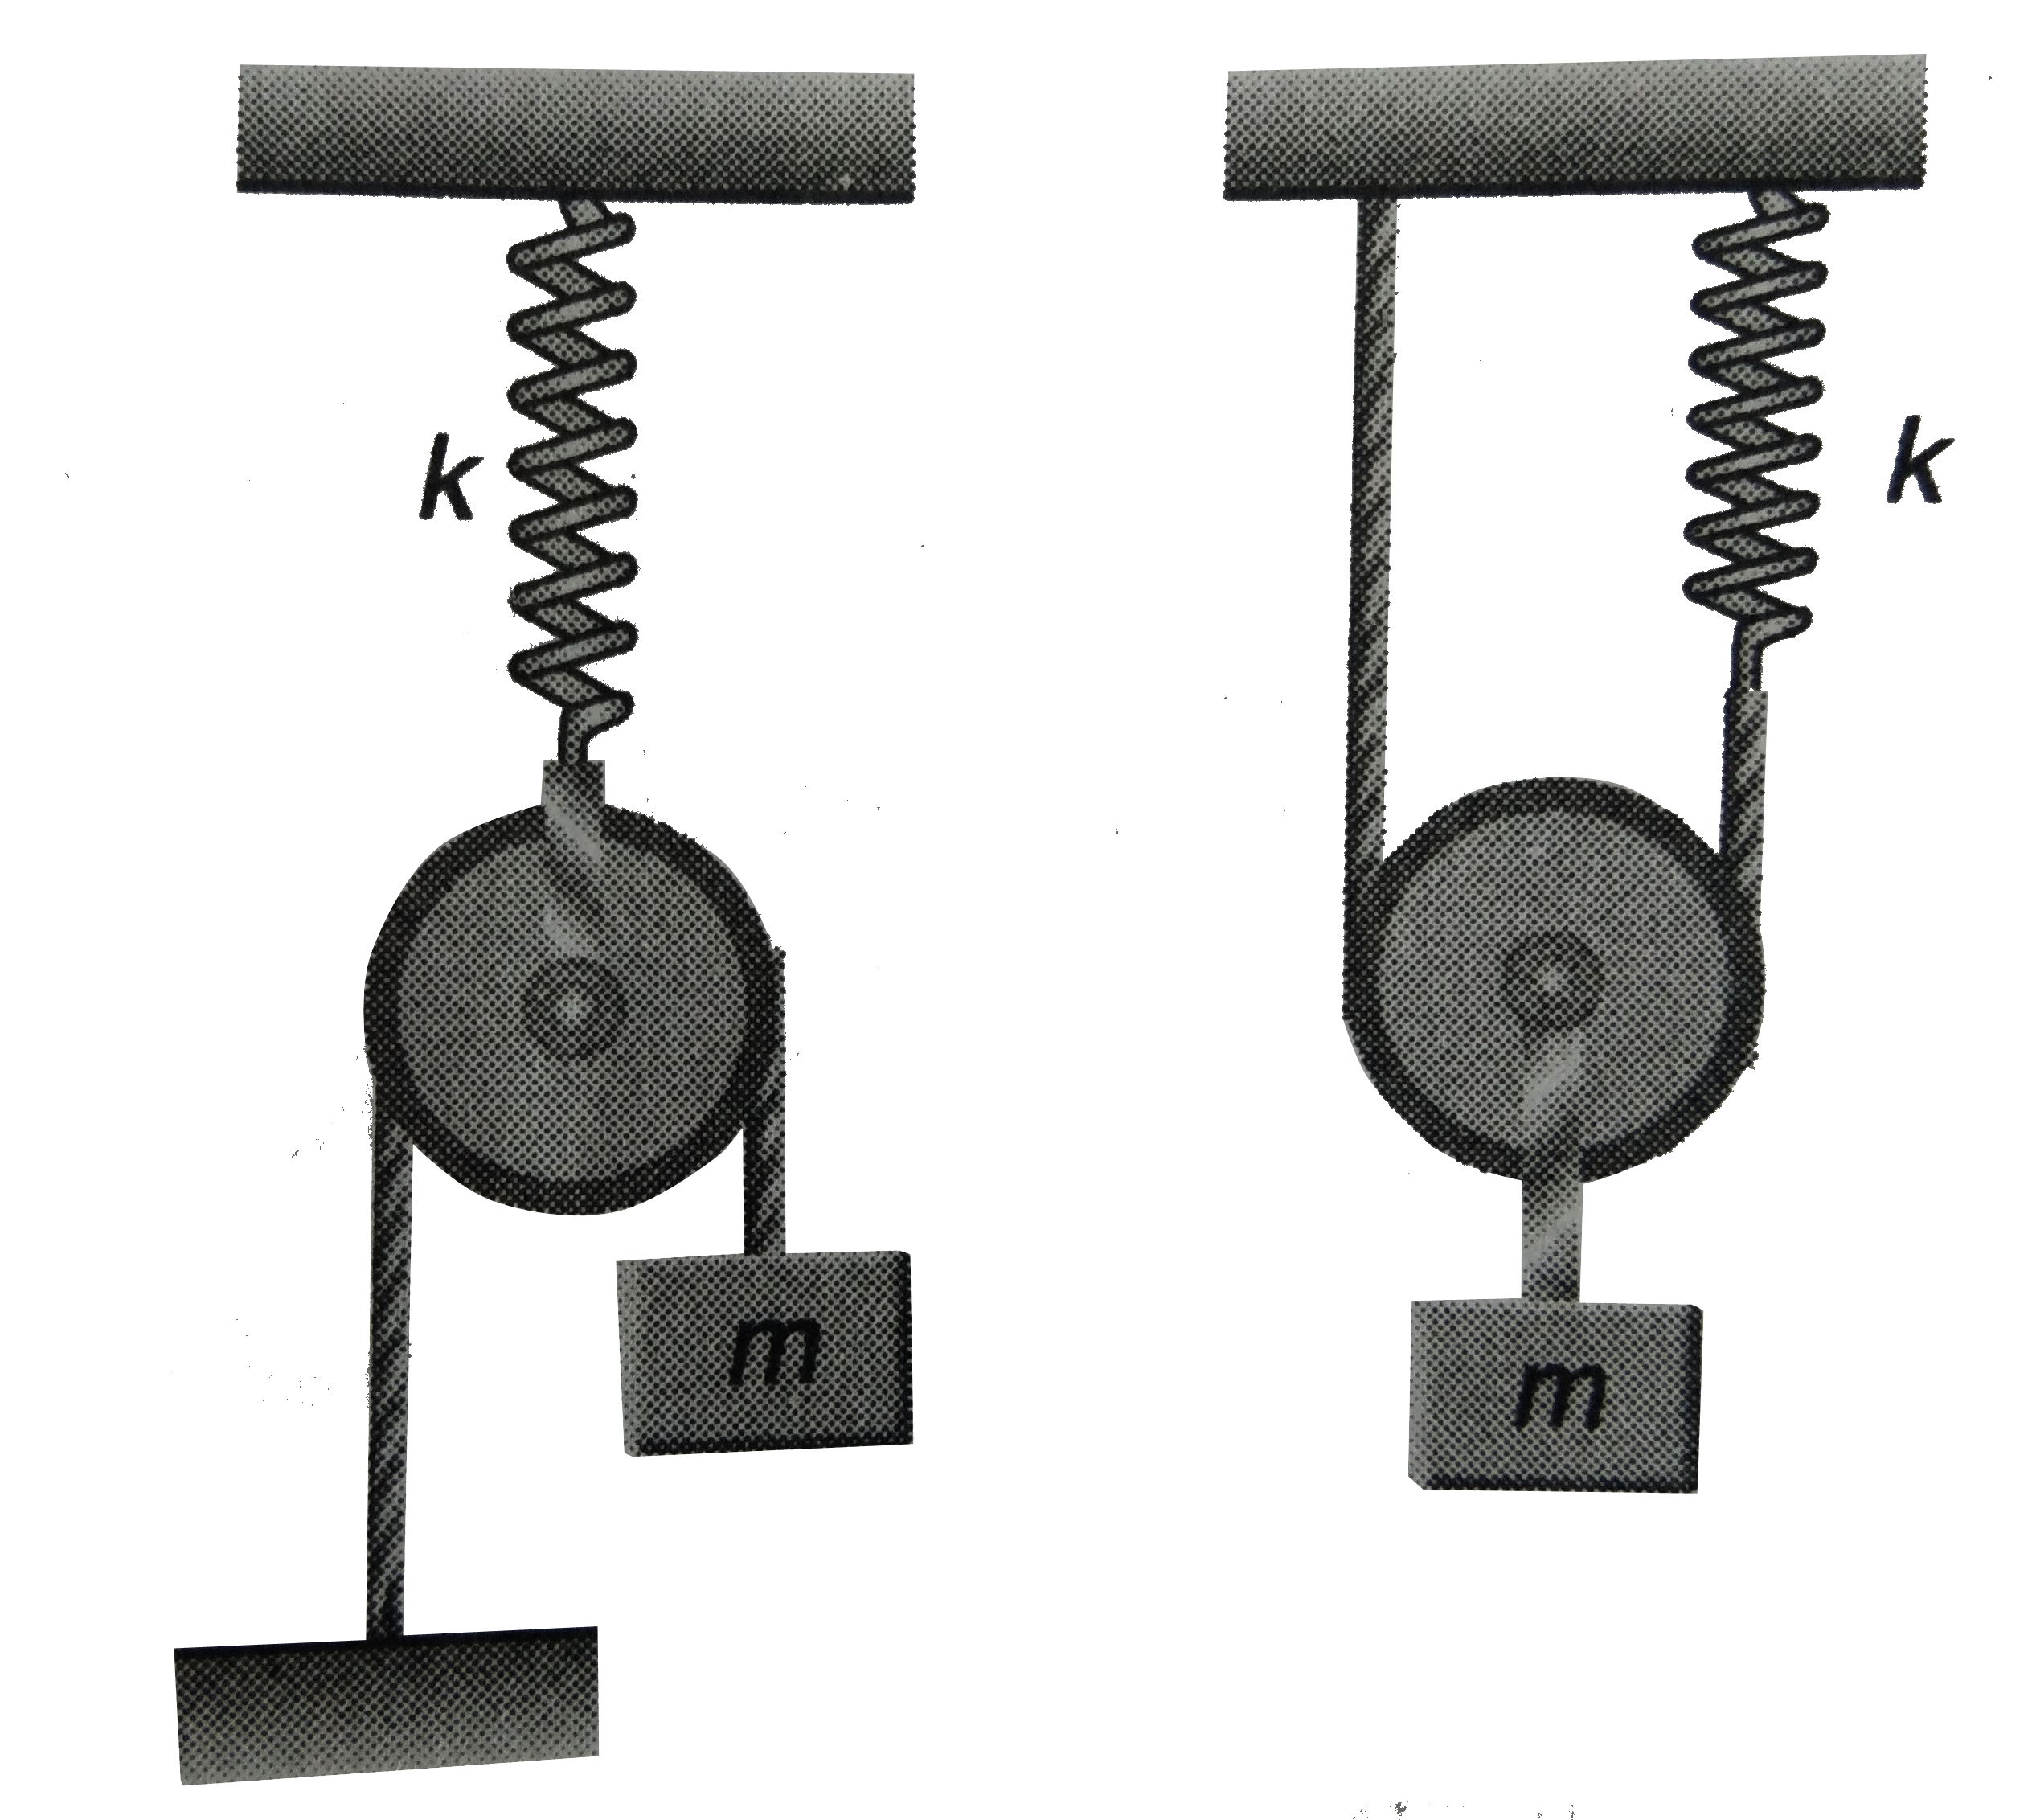 Figure shows a system consisting of a massless pulley, a spring of force constant k and a block of  mass m. If the block is slightly displaced vertically down from its equilibrium and released, find the period of its vertical oscillation in cases (a) and (b).